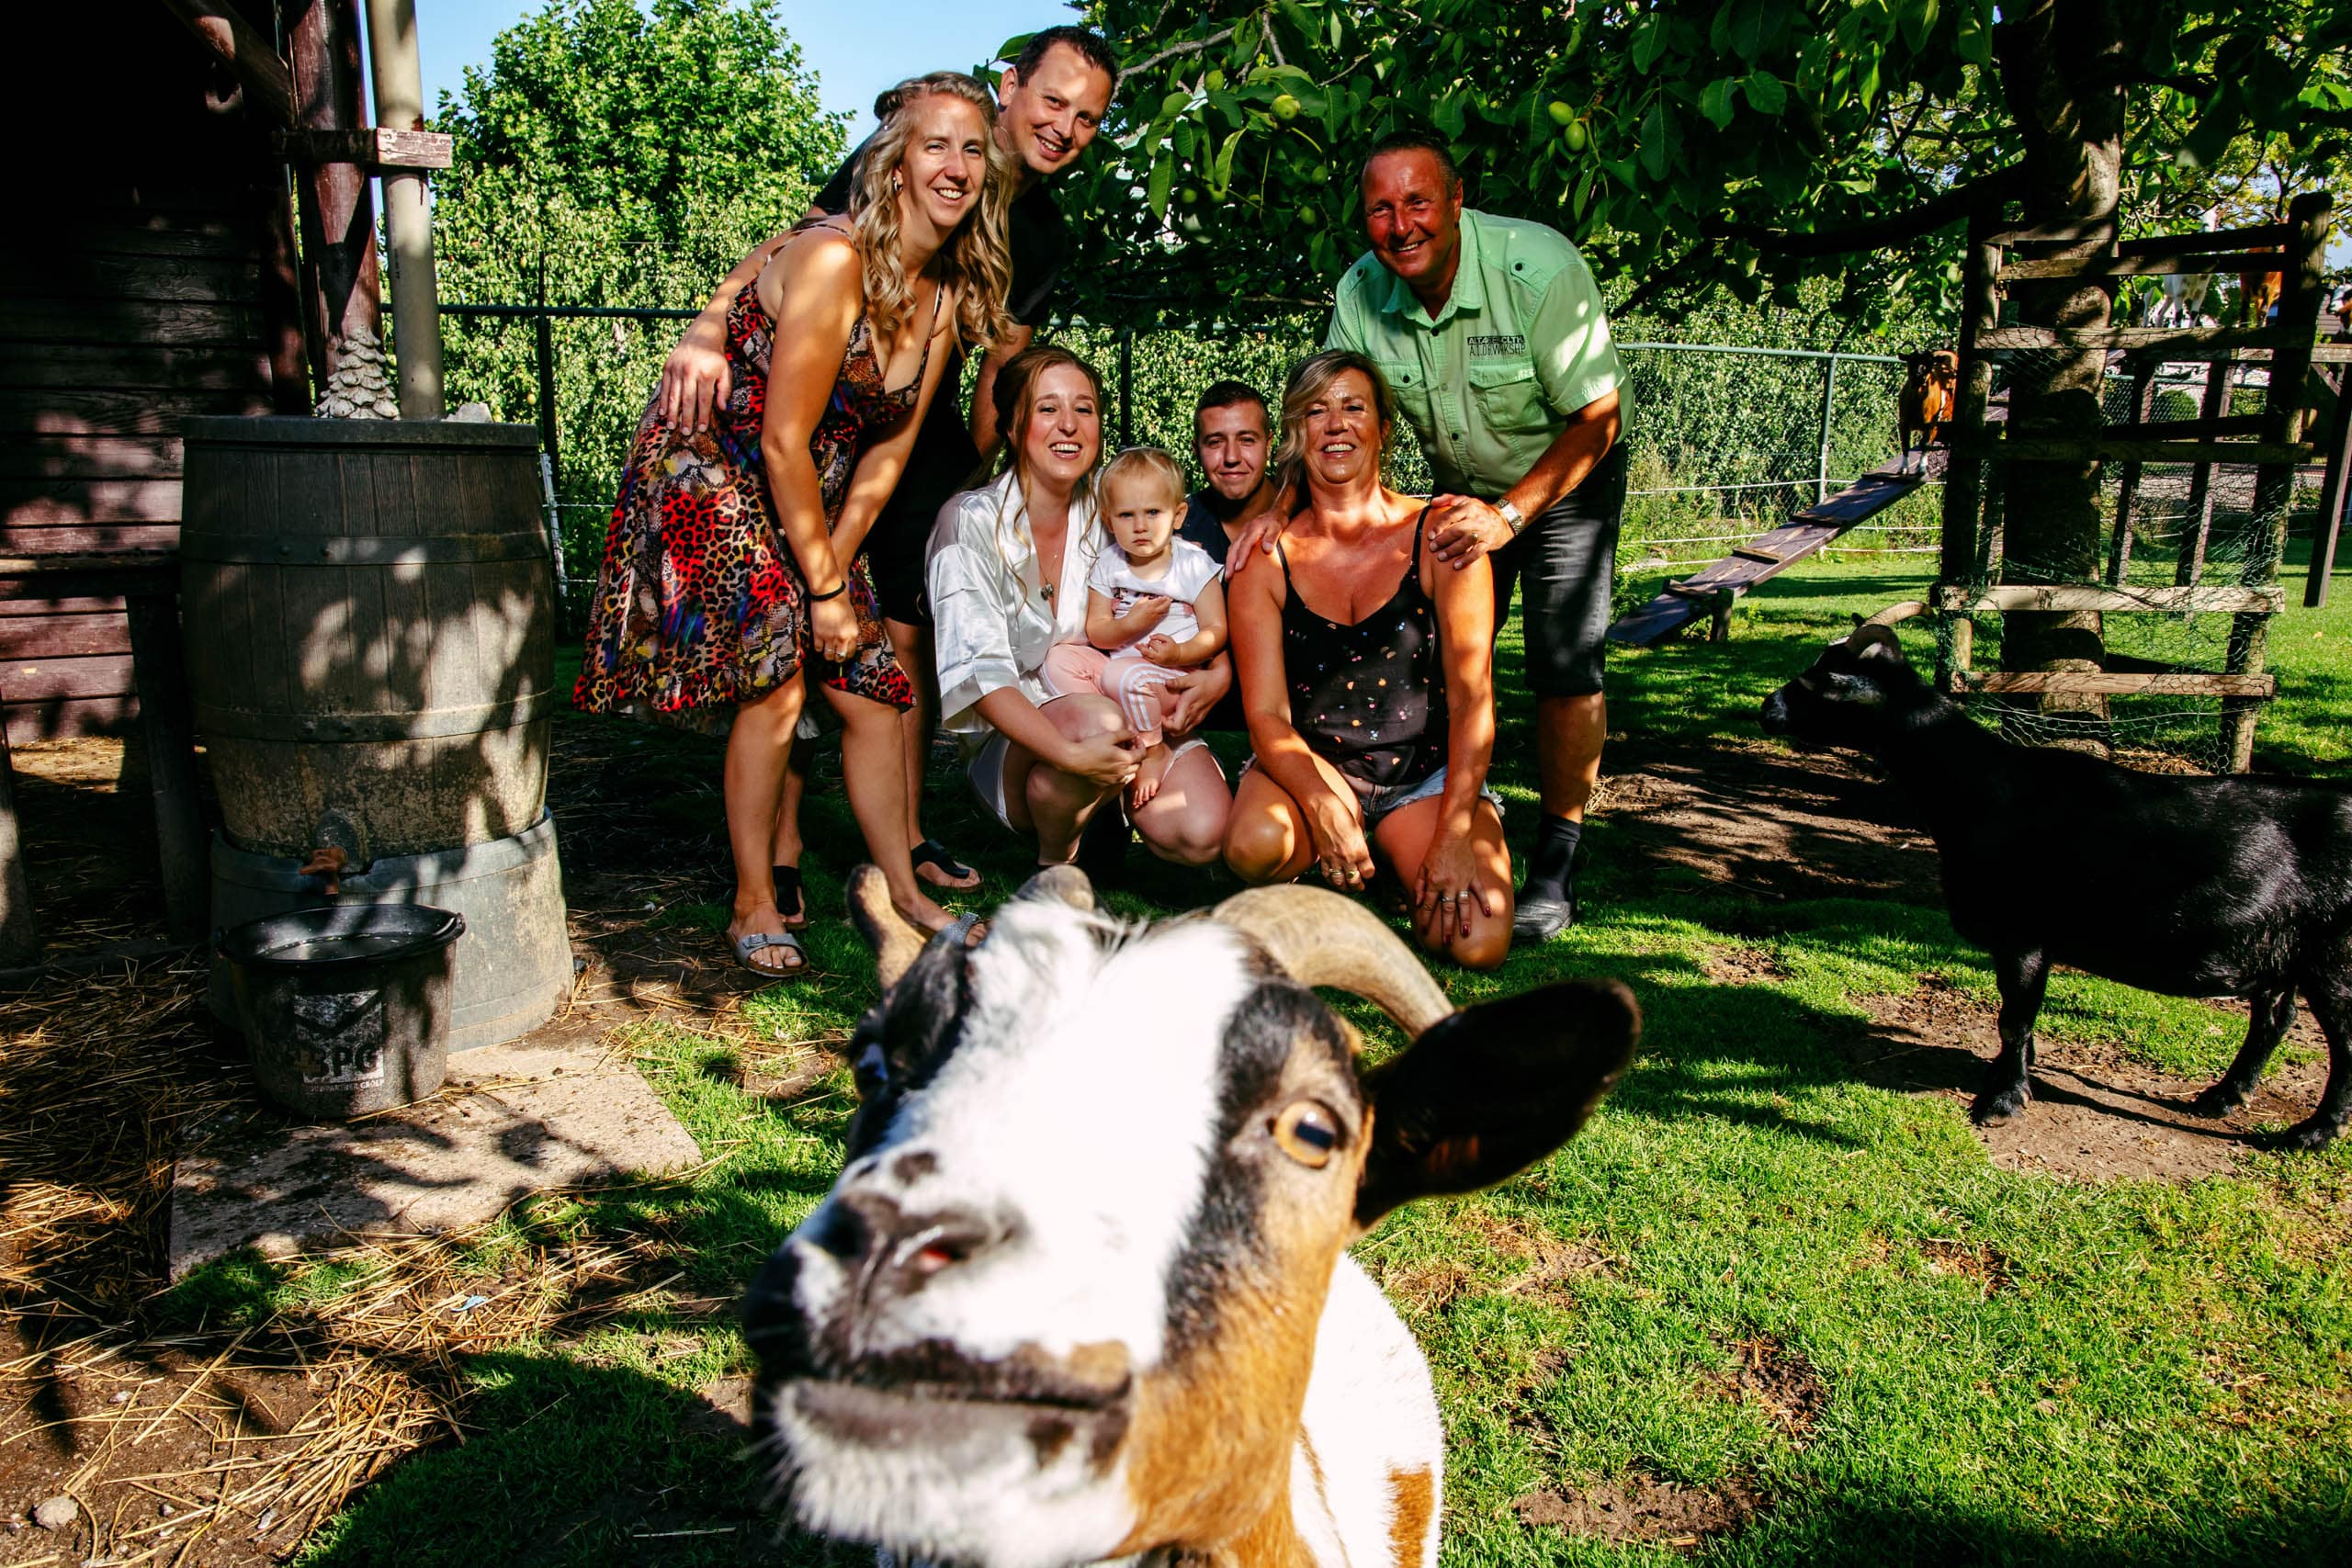 A group of people pose for a photo with a goat during special wedding photos.